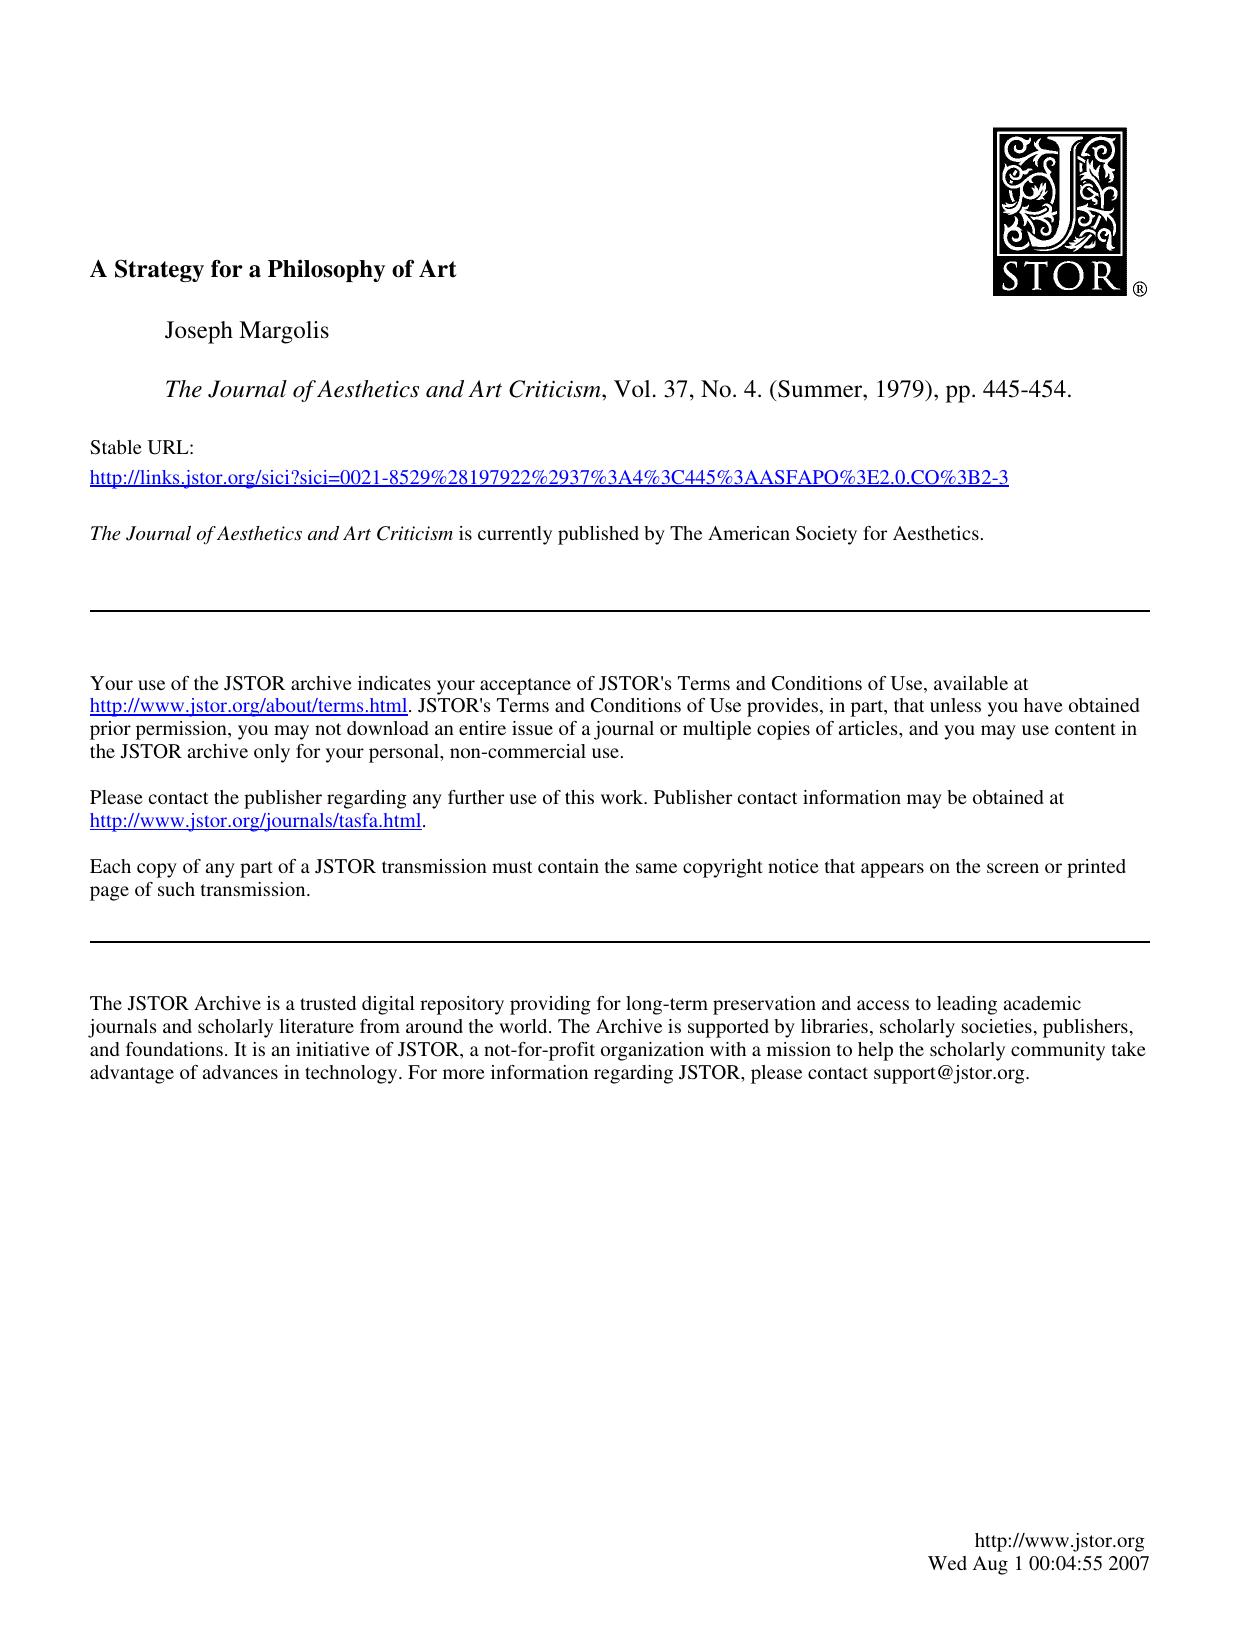 A Strategy for a Philosophy of Art - Paper